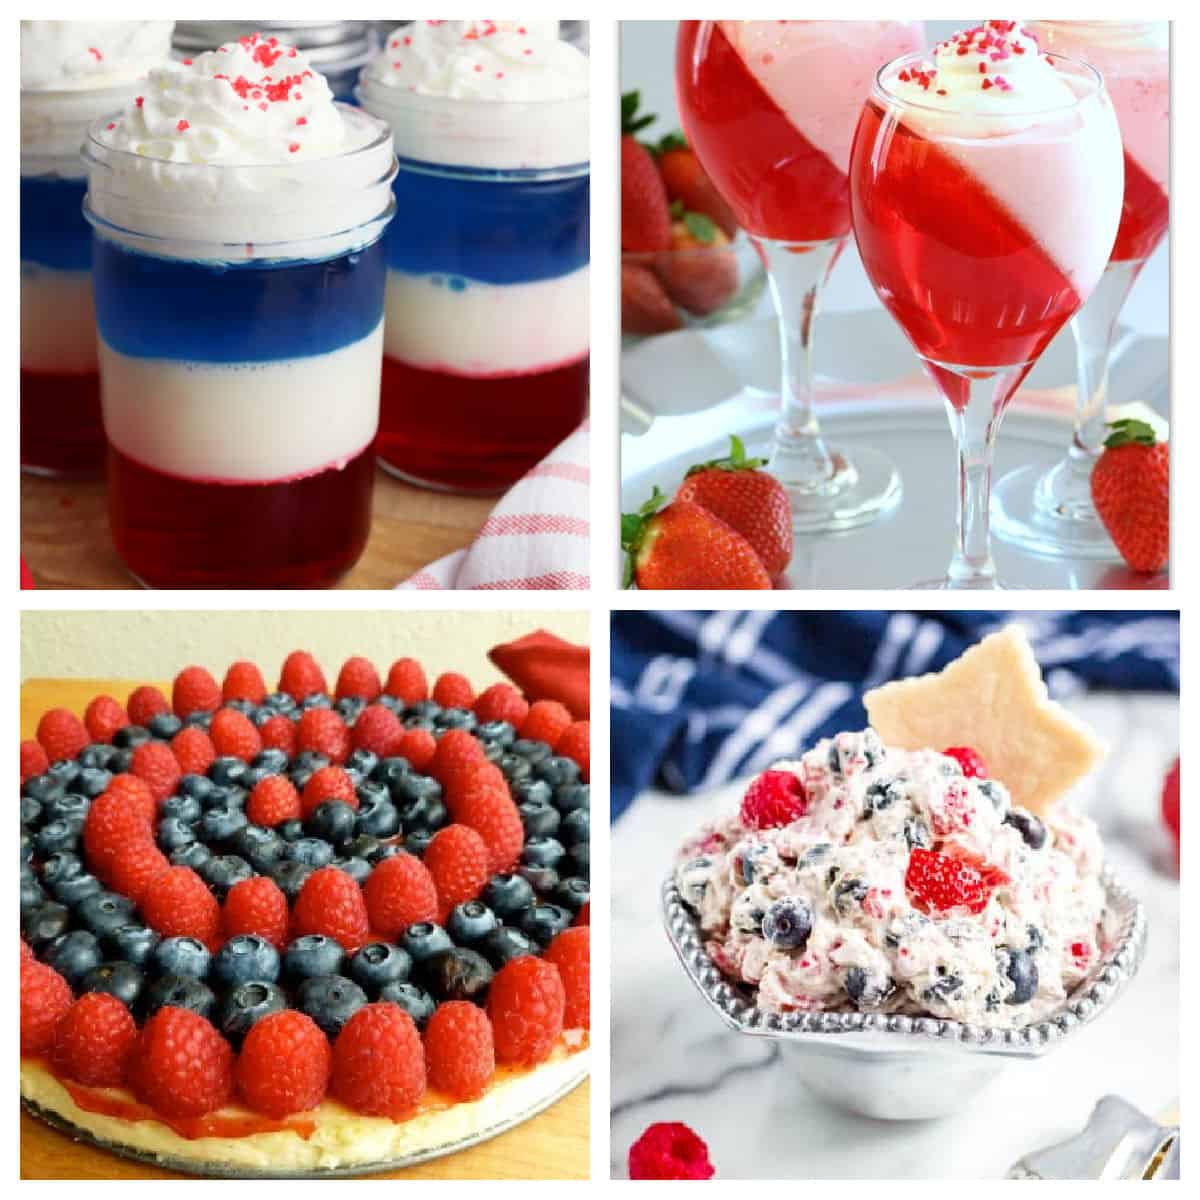 Collage of red, white, and blue desserts.